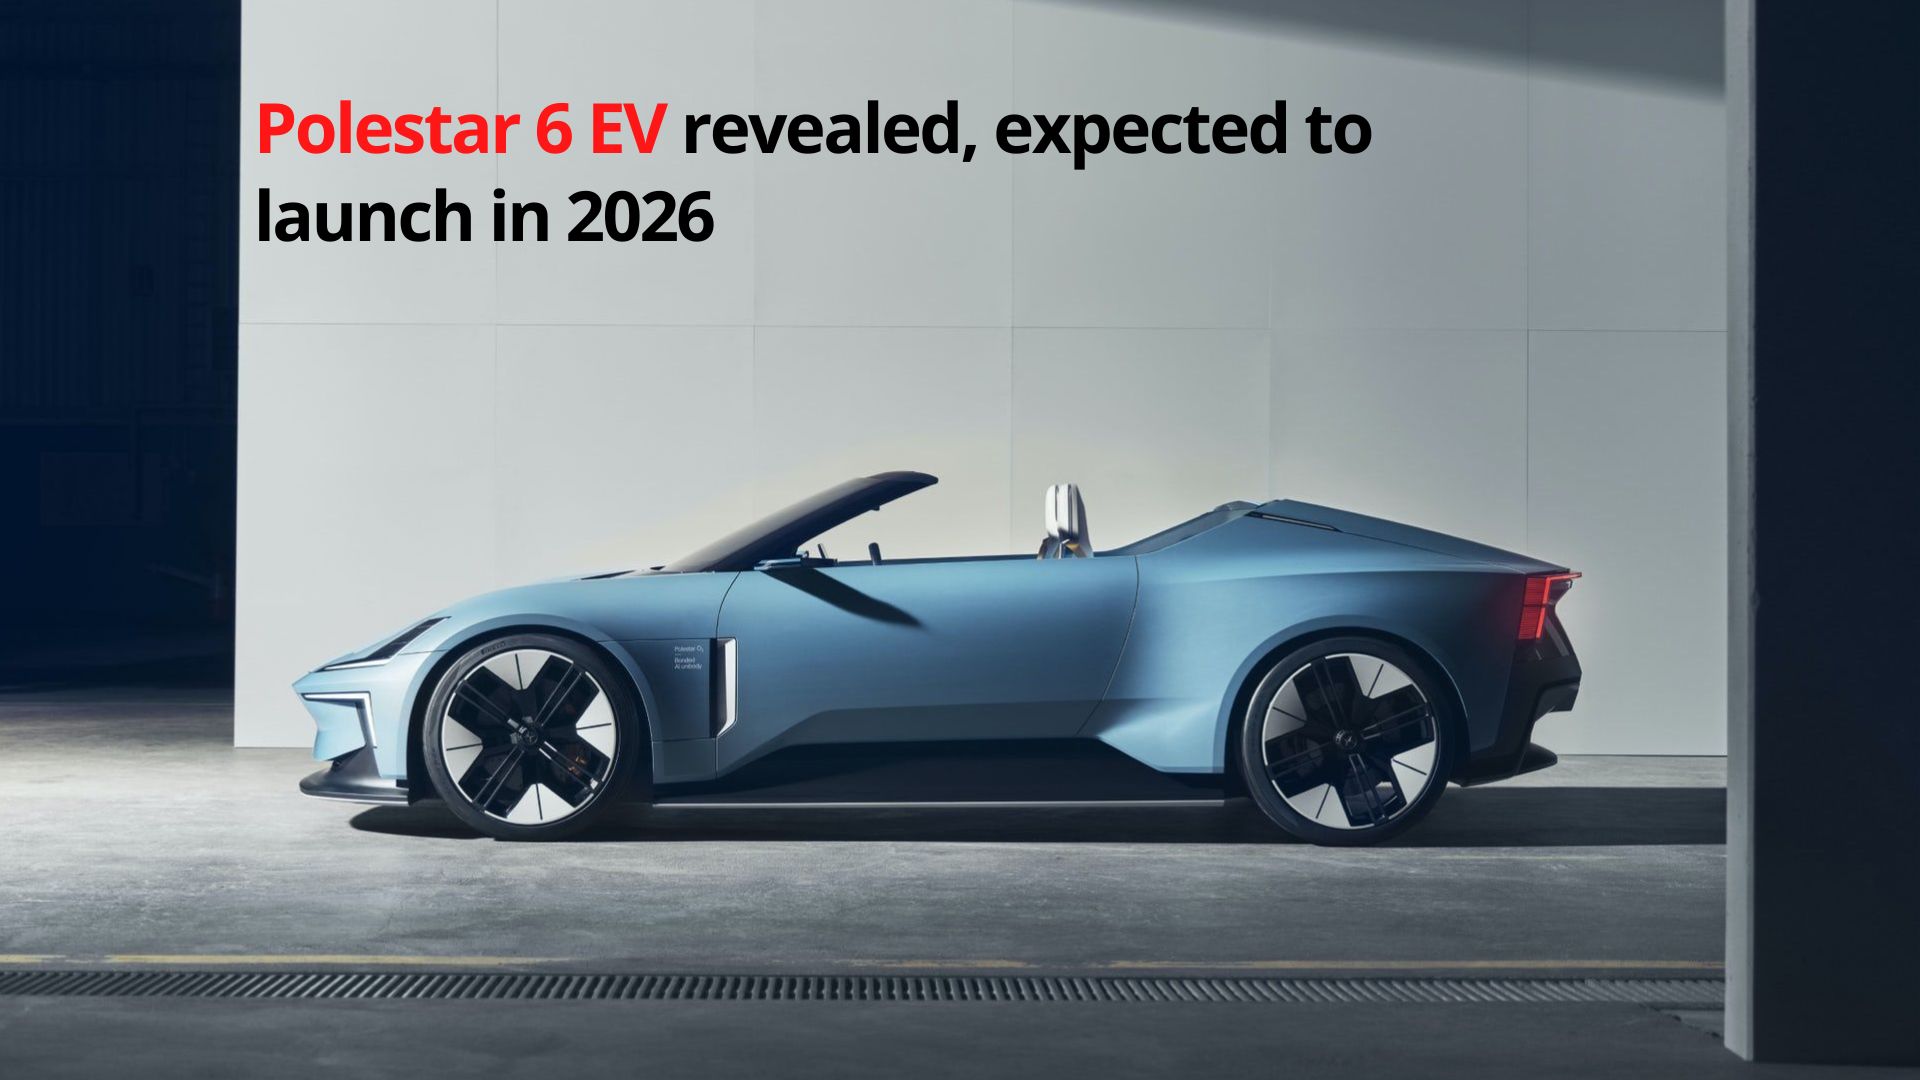 https://e-vehicleinfo.com/polestar-6-electric-roadster-concept-revealed-launch-in-2026/